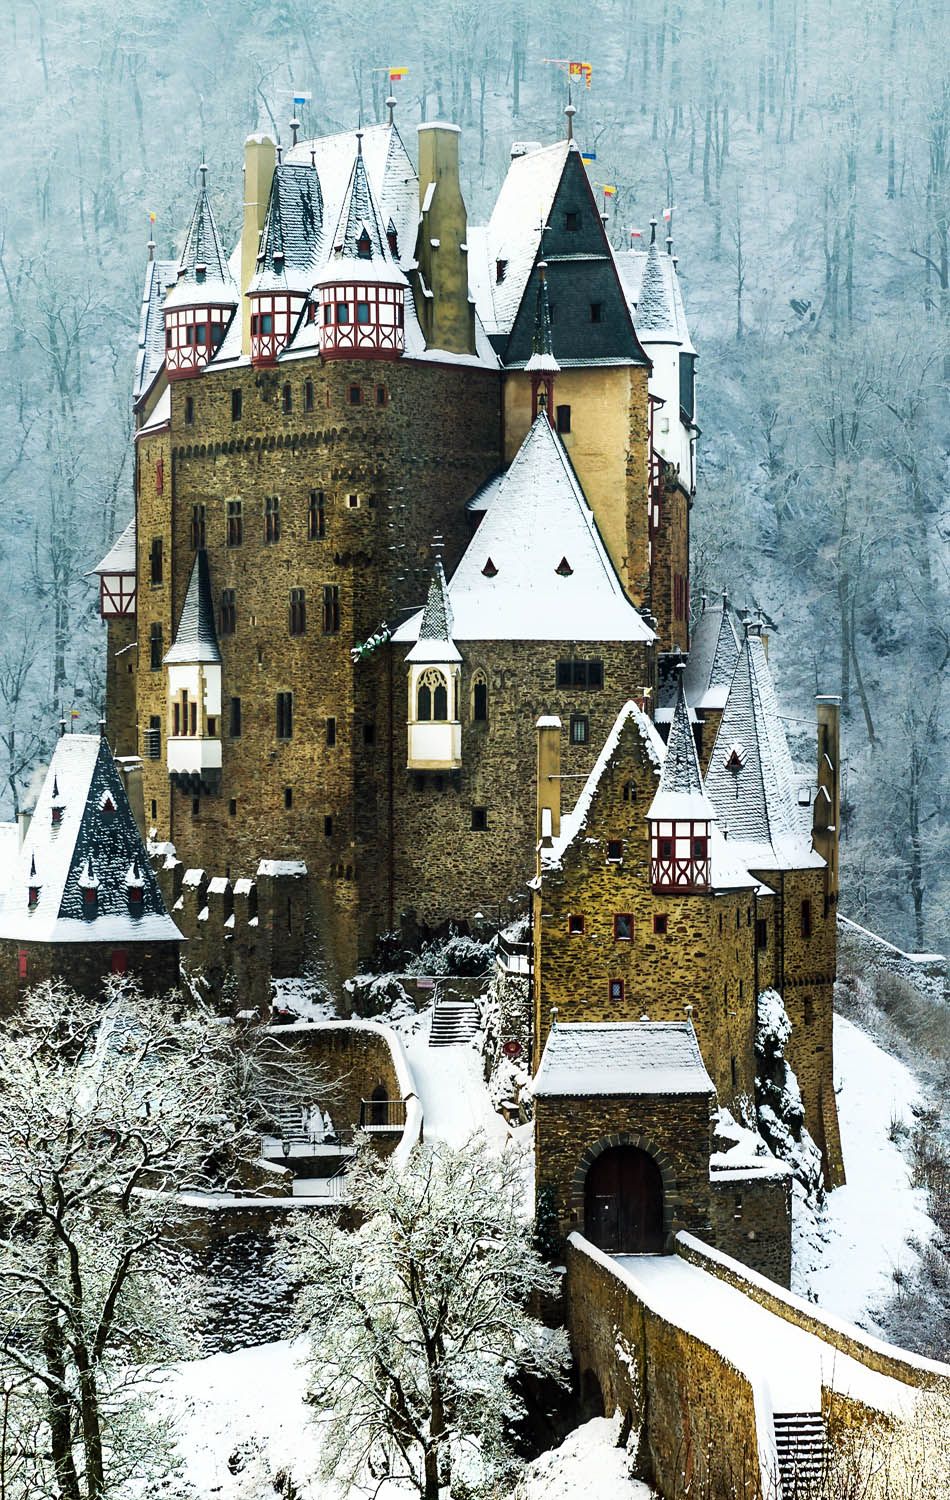 The 20 Most Stunning Fairytale Castles in Winter – Page 11